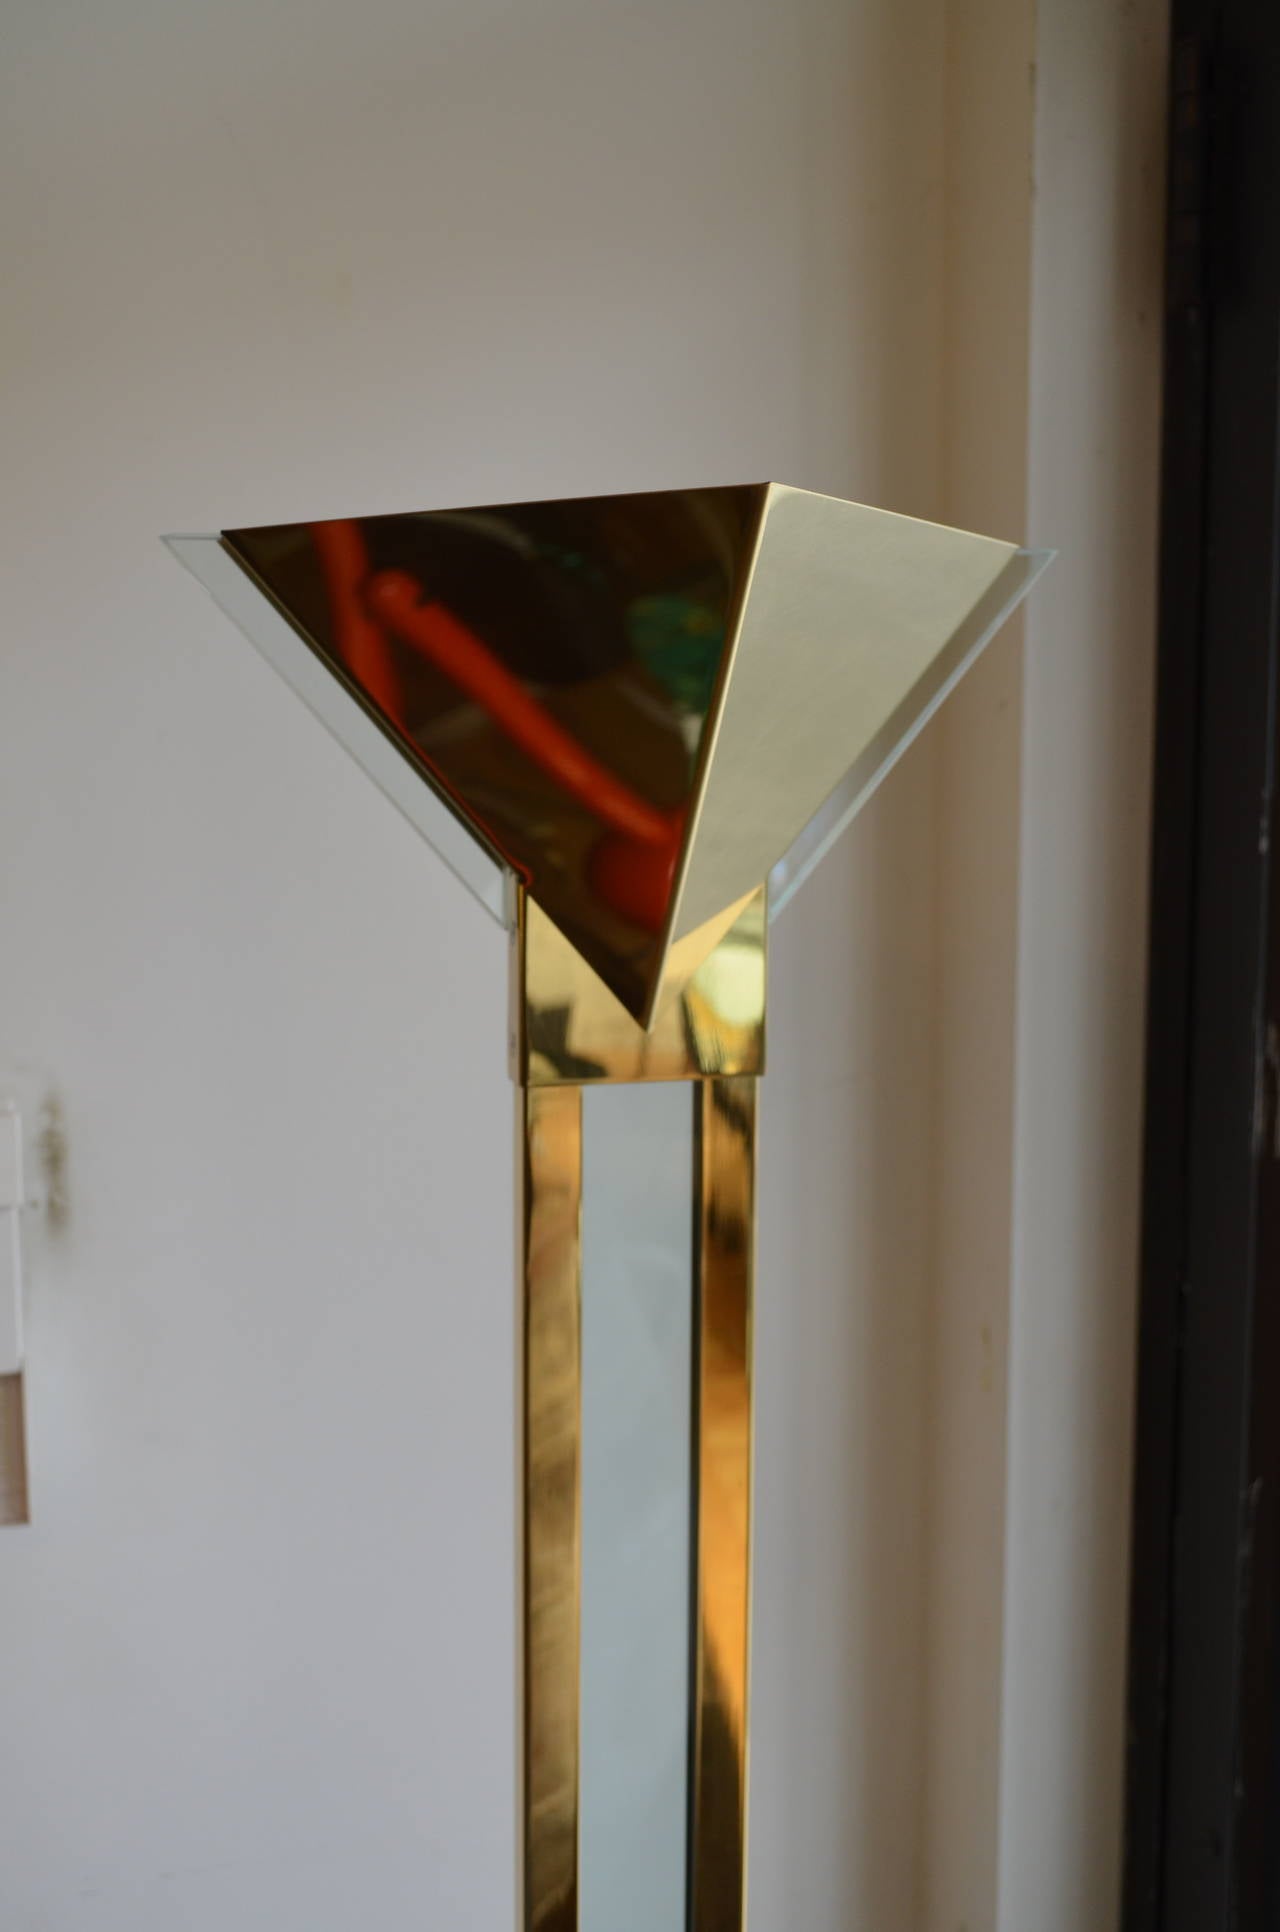 A sculptural brass and Lucite torchiere by Robert Sonneman
for George Kovacs.